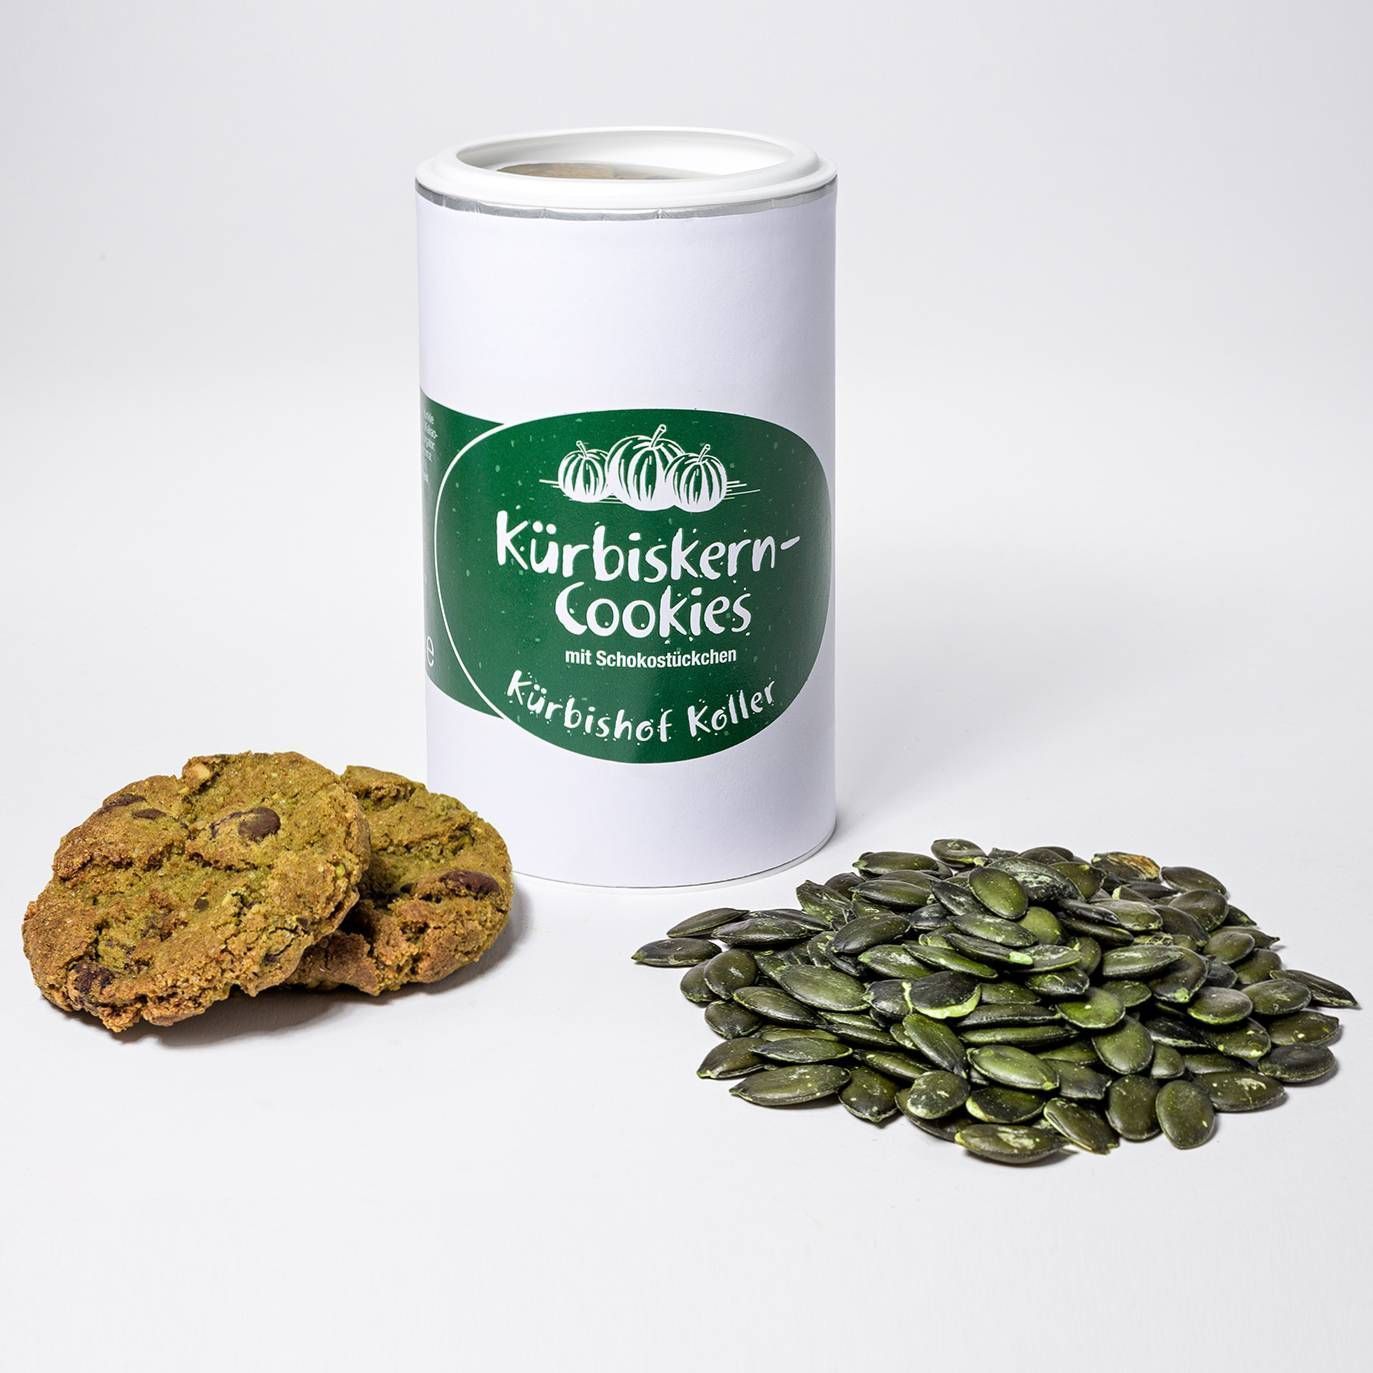 Pumpkin Seed Cookies with Chocolate Chips in Greece